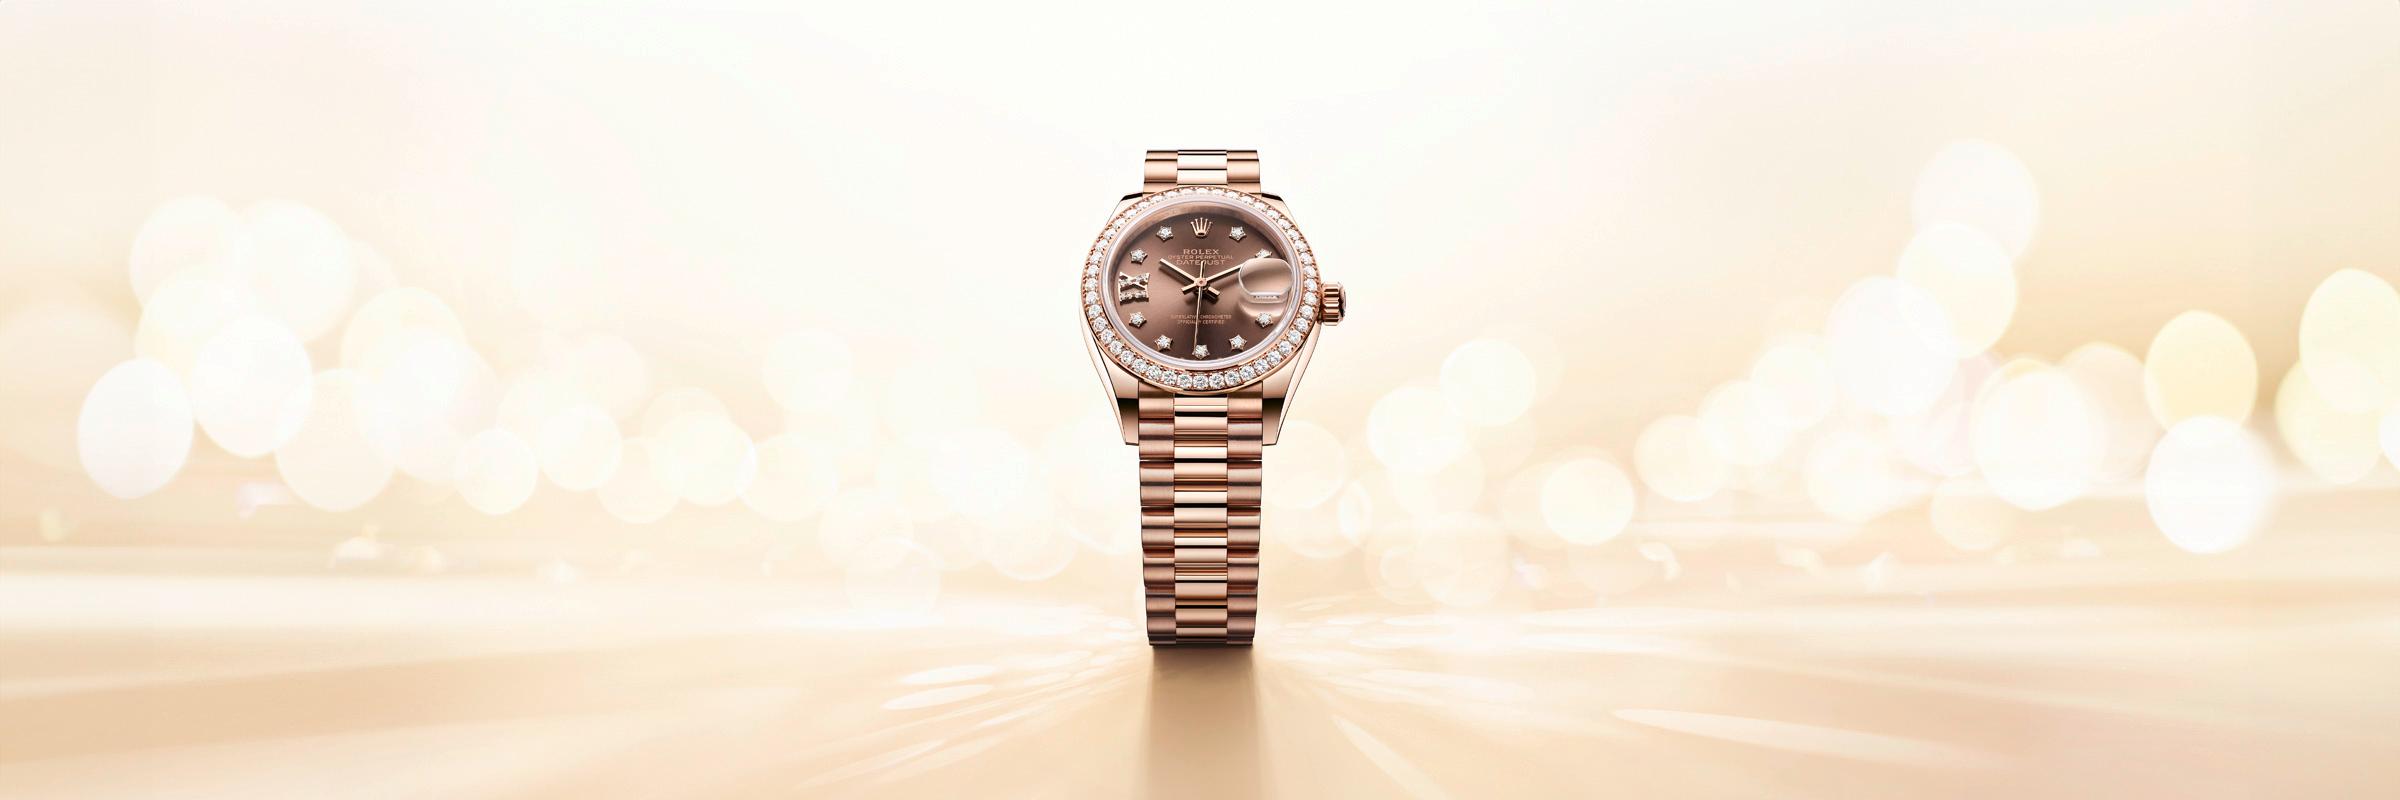 rolex-collection_banner-lady-datejust-m279135rbr-0001_2301jva_001